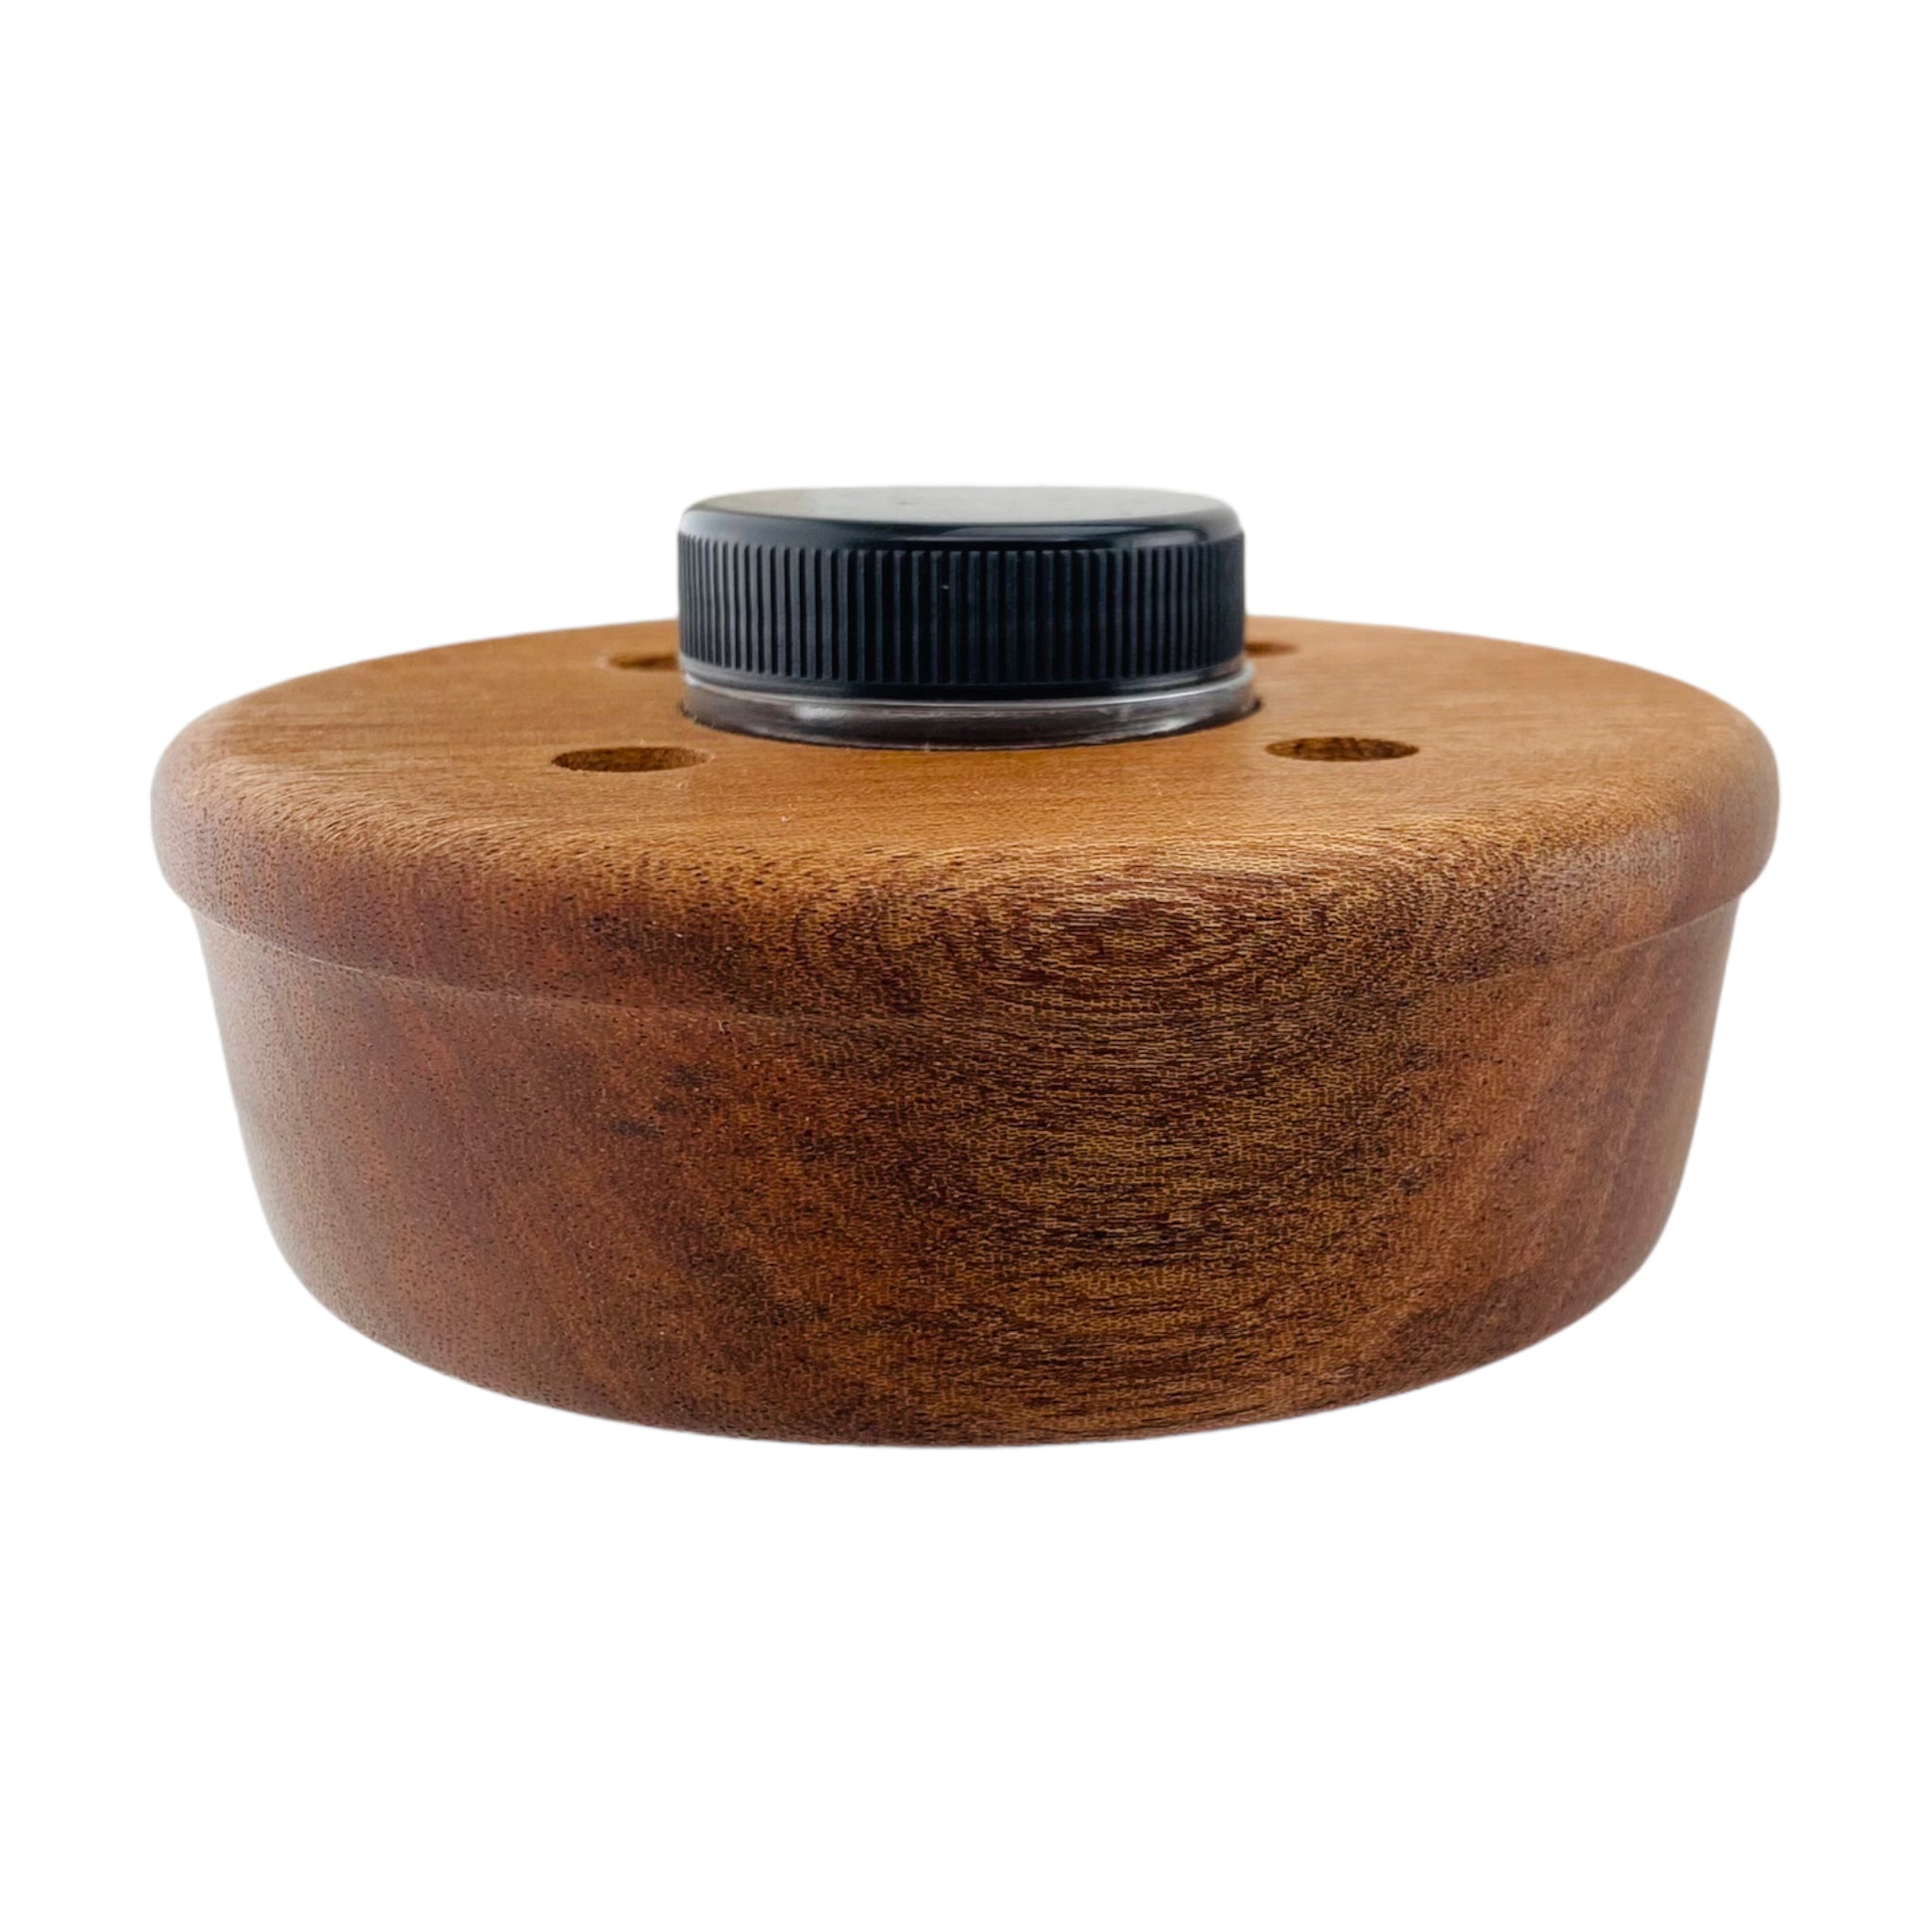 Round 4 Hole Wood Display Stand Holder For 10mm Bong Bowl Pieces Or Quartz Bangers - Mahogany Planter